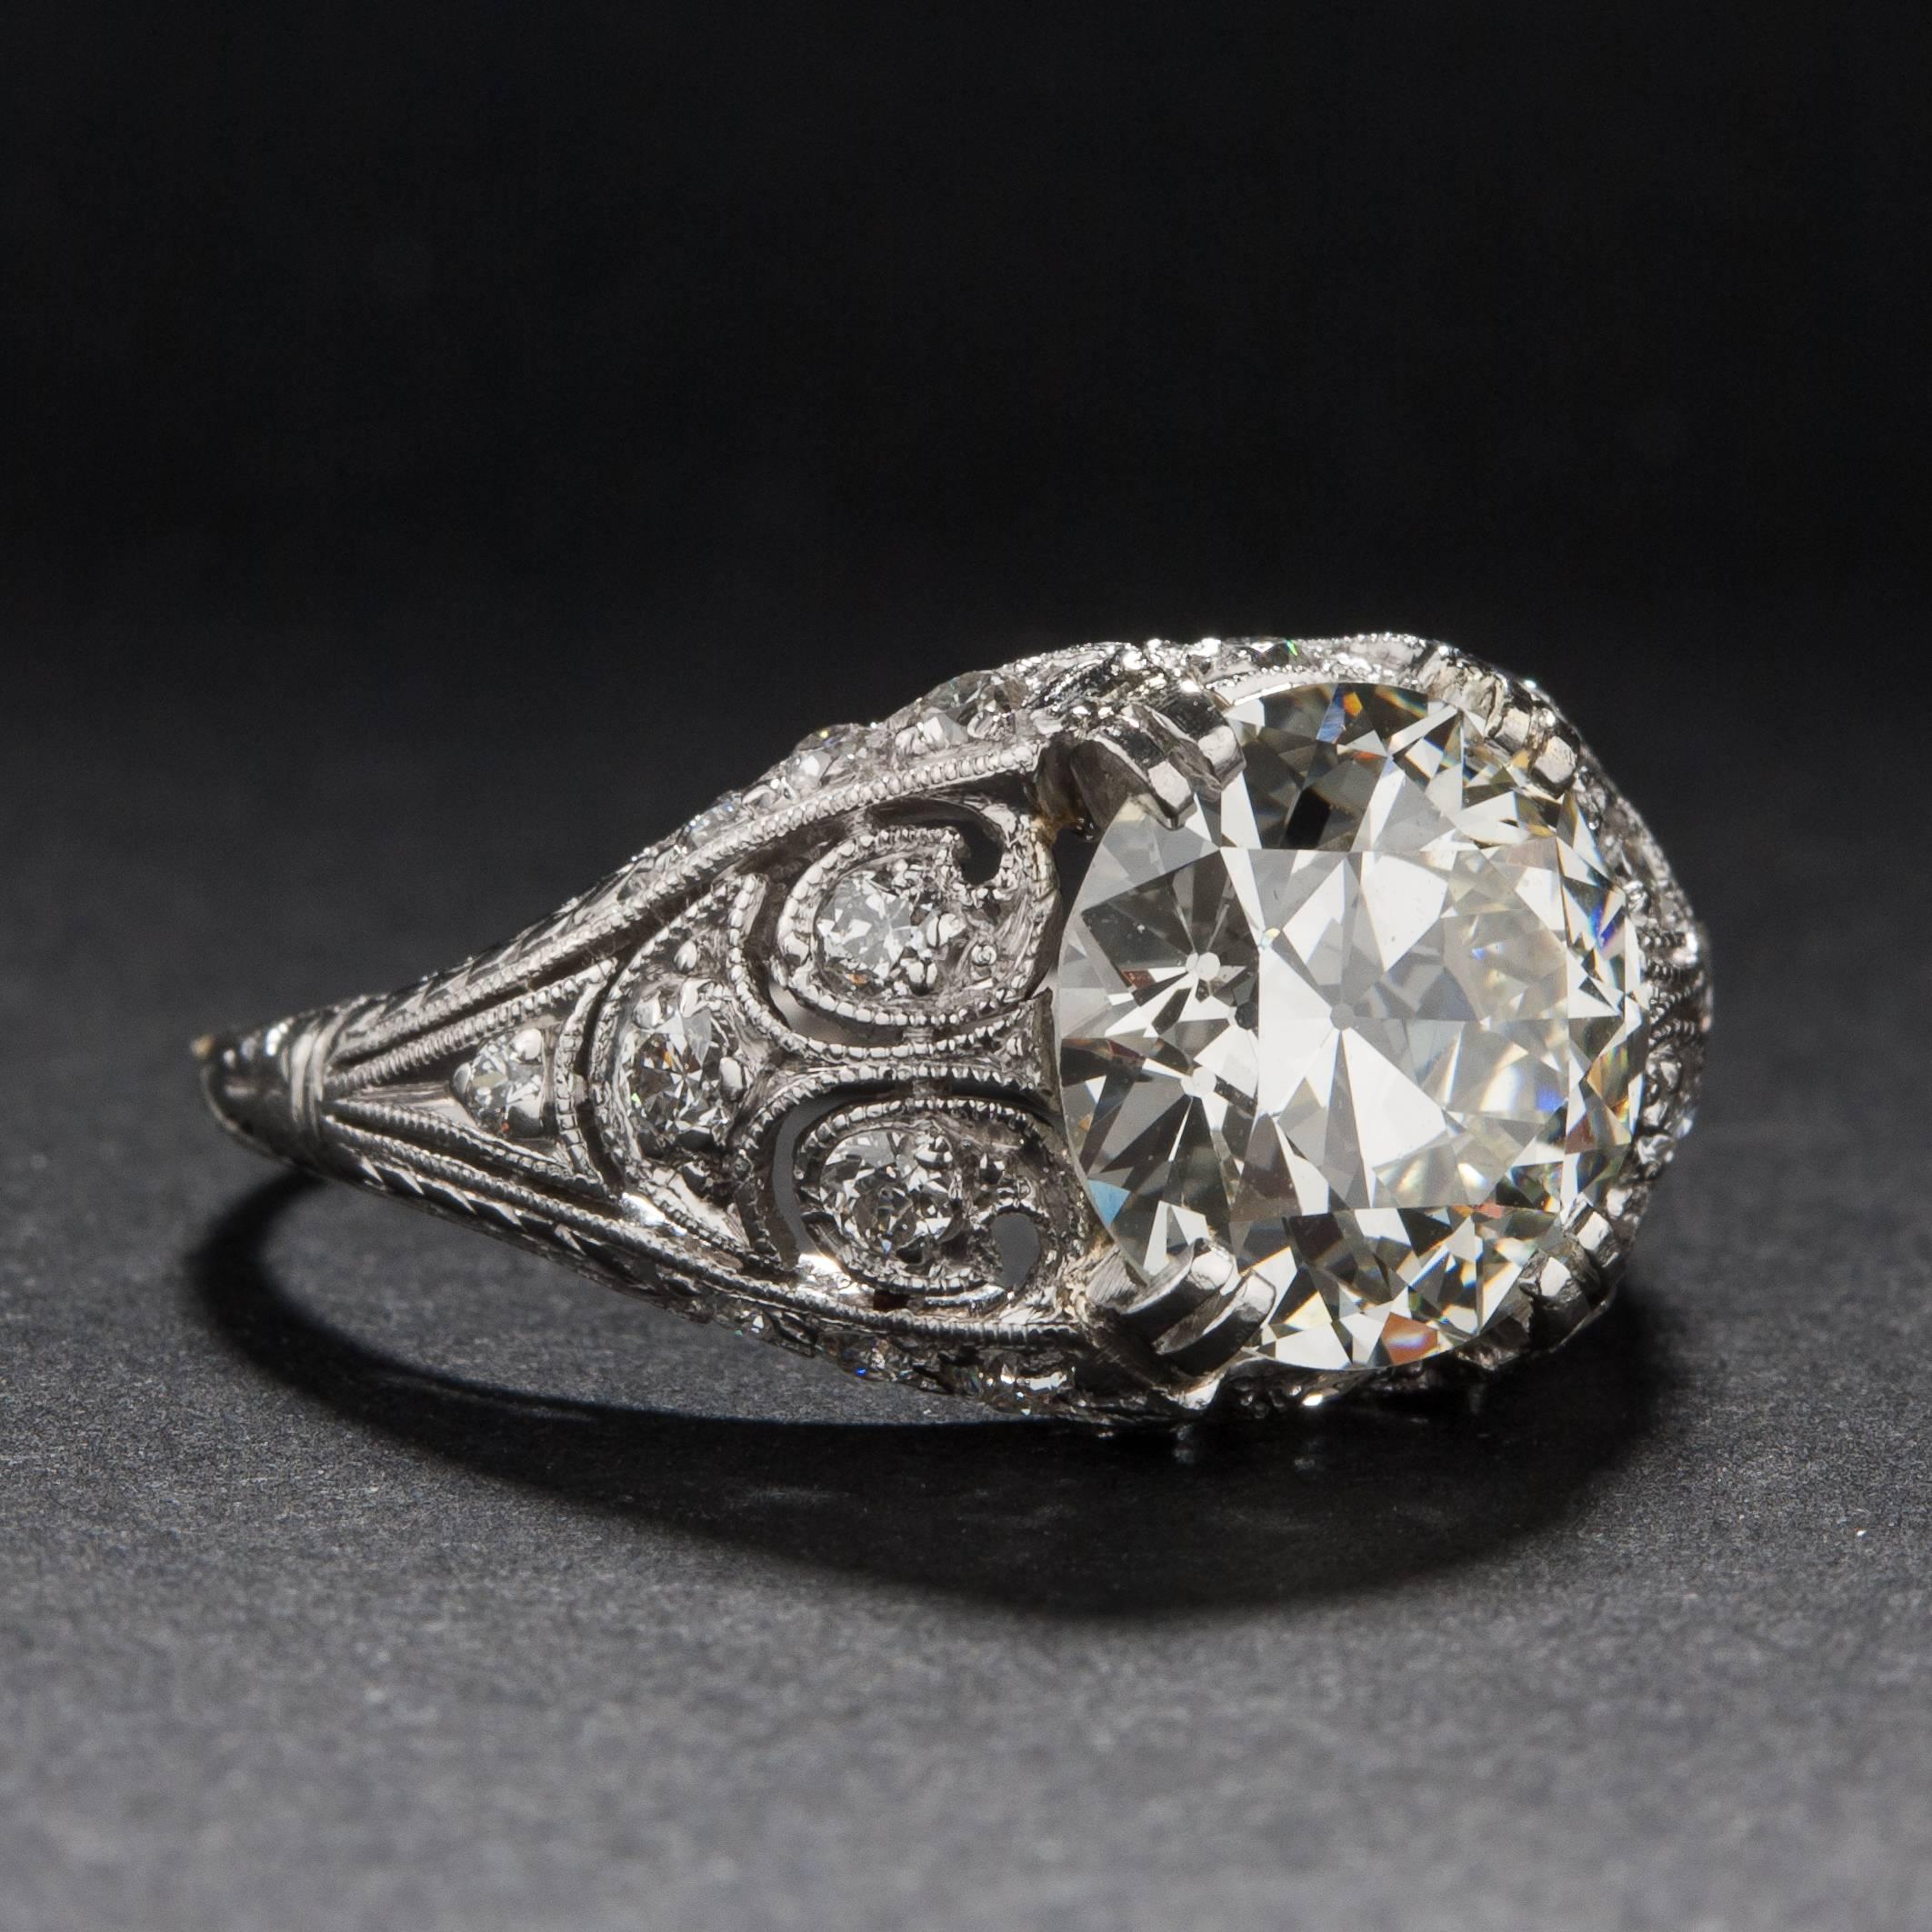 1910s Edwardian 2.42ct Diamond Ring In Excellent Condition For Sale In Carmel, CA